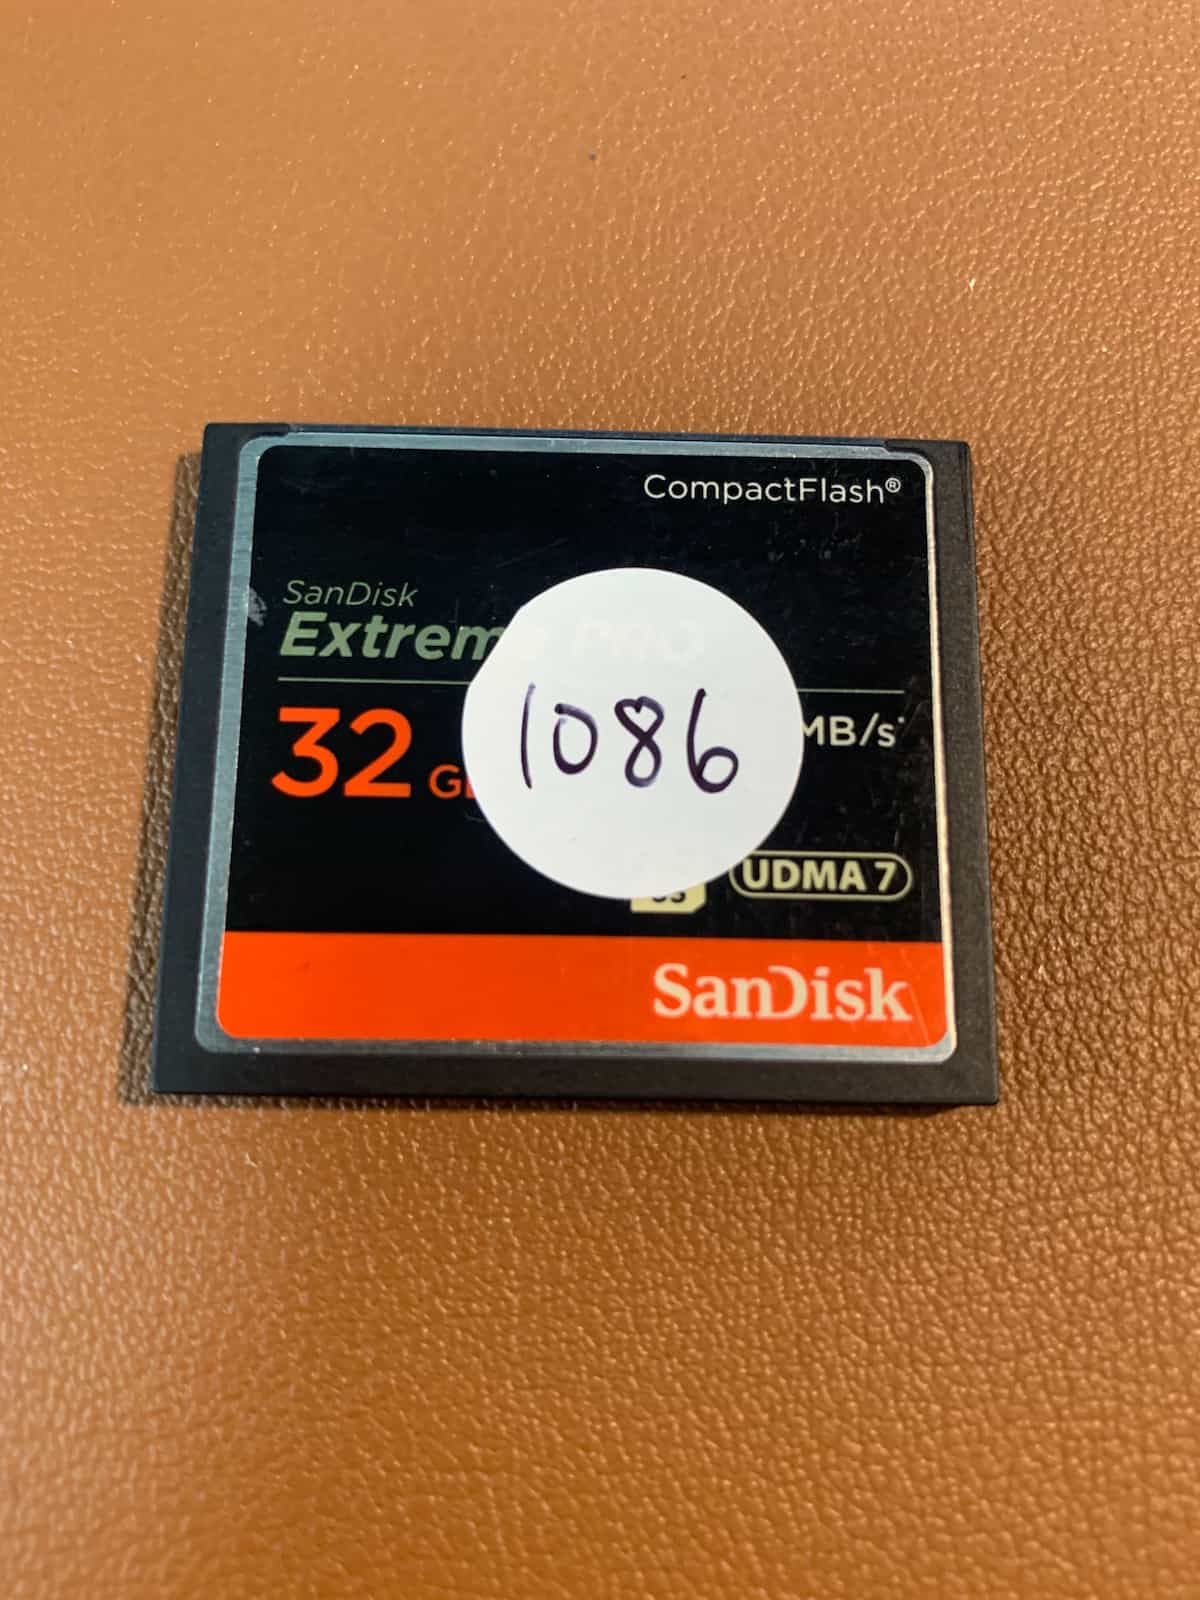 CompactFlash card for Recovery